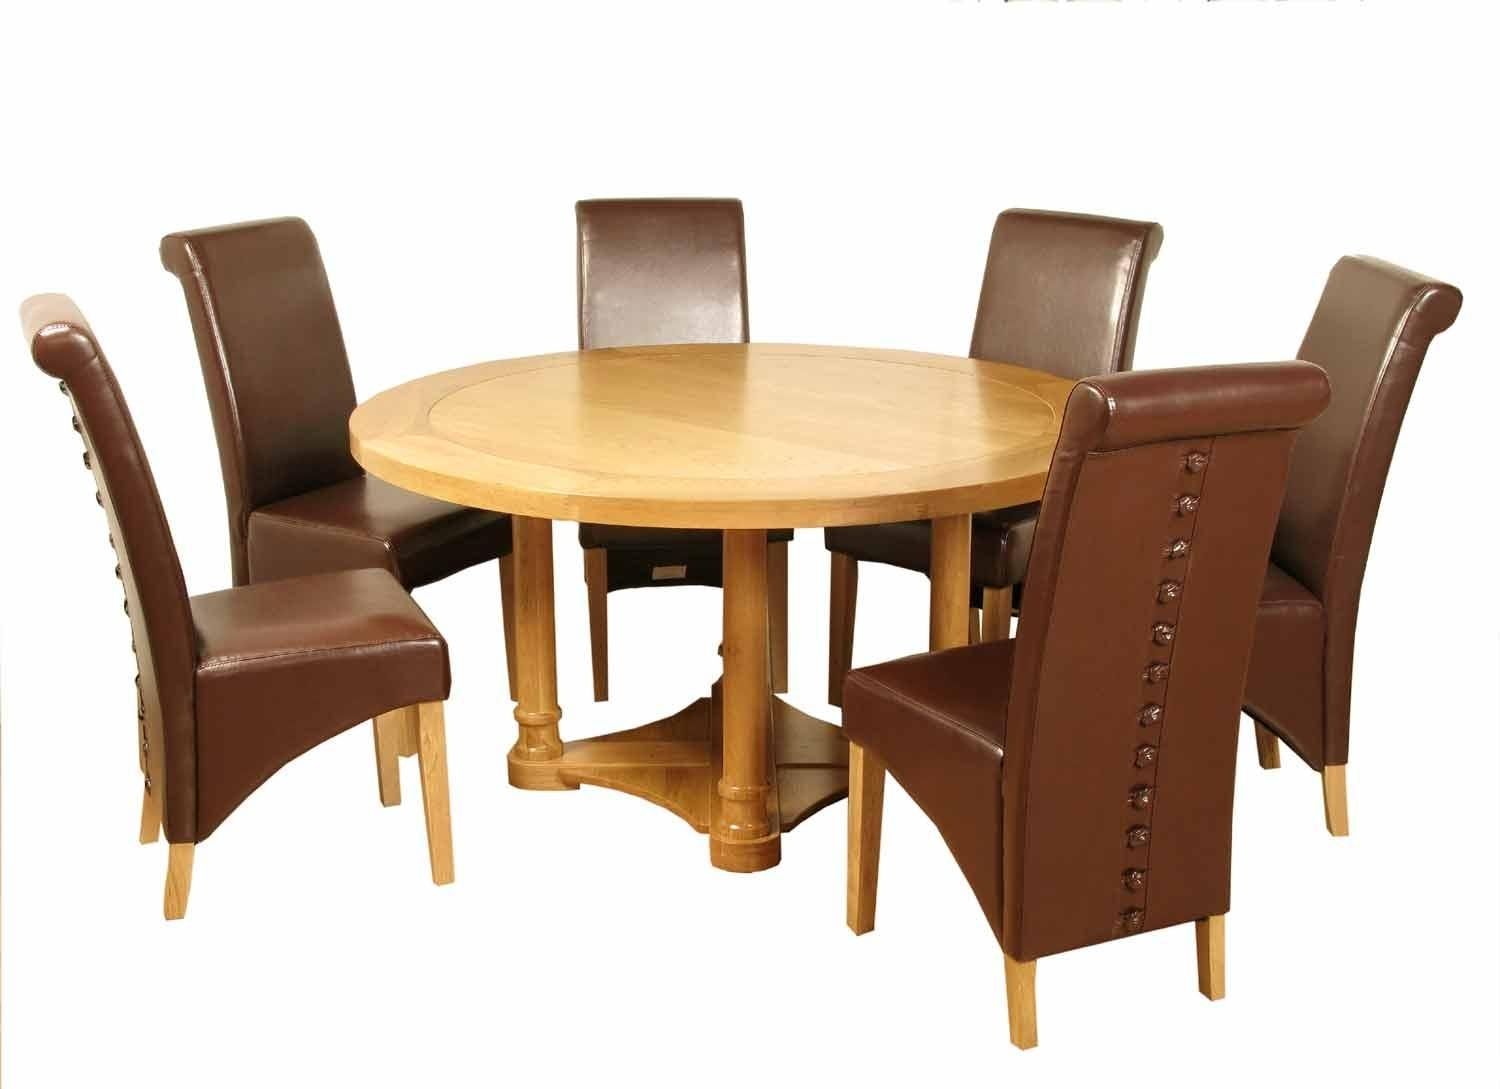 5Ft Rocco Solid Oak Dining Set + 4 Chairs – Dublin, Ireland Within Most Popular Rocco Extension Dining Tables (View 7 of 20)